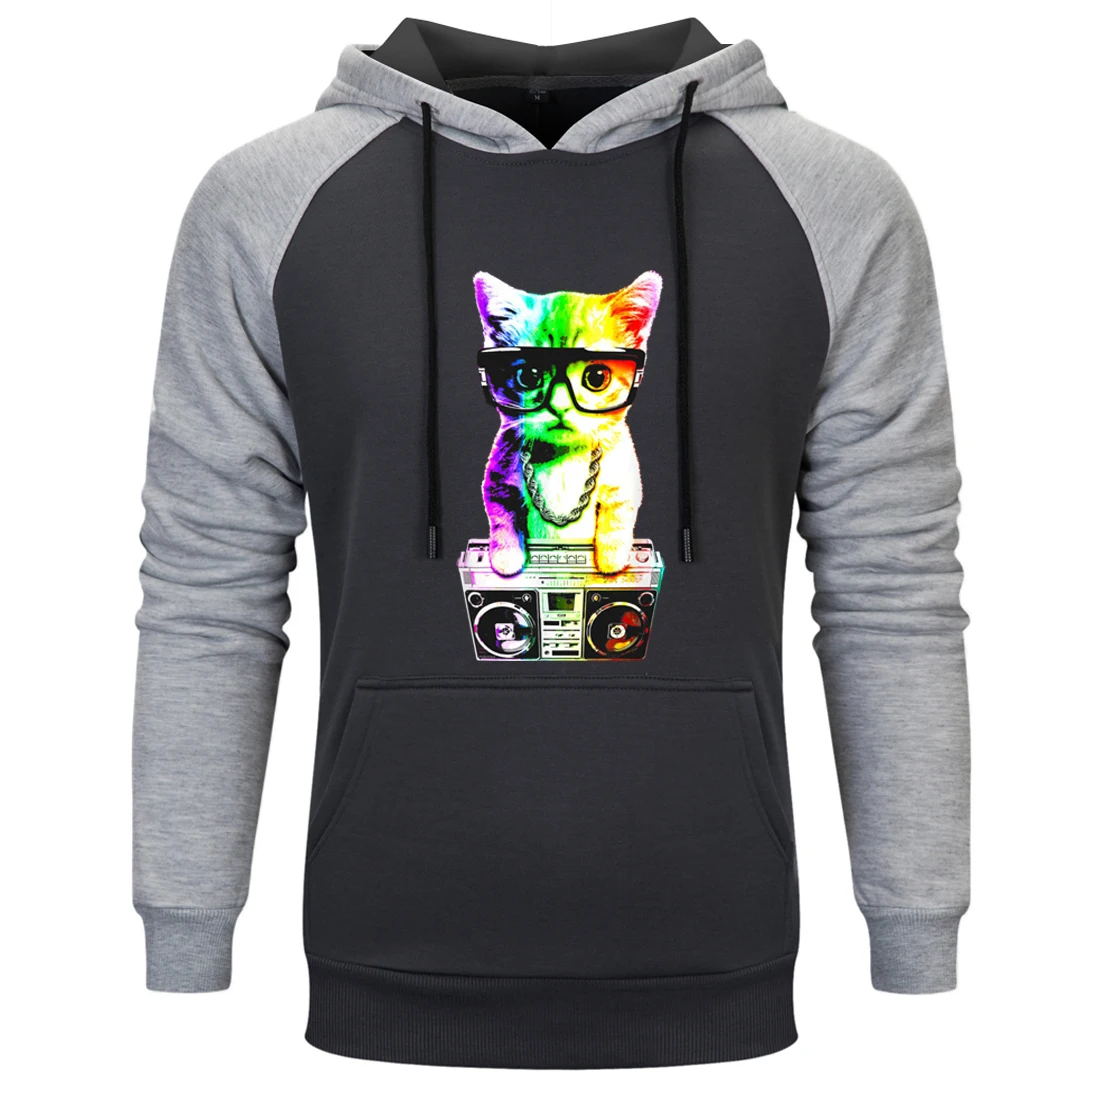 

Colored Cat Raglan Hooded Mens K-pop Hip Hop Sweatshirts and Hoodie Standard Leisure Pullovers Tops Fashion Tracksuits Homme